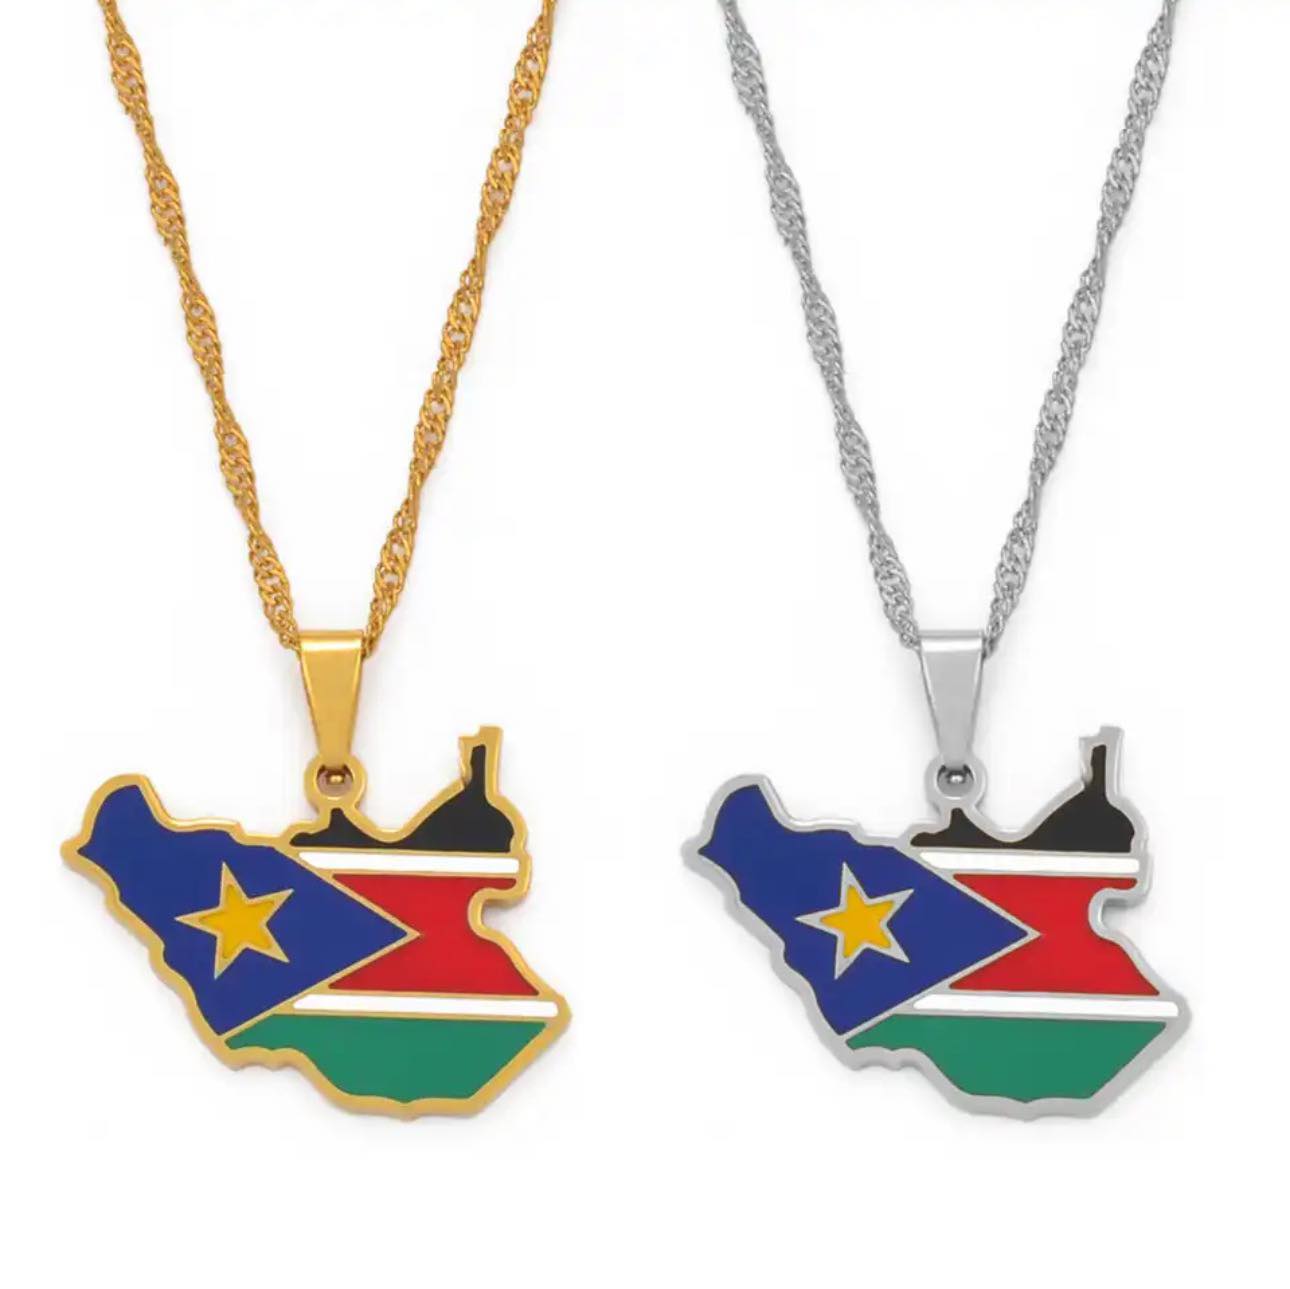 South Africa Flag Necklace